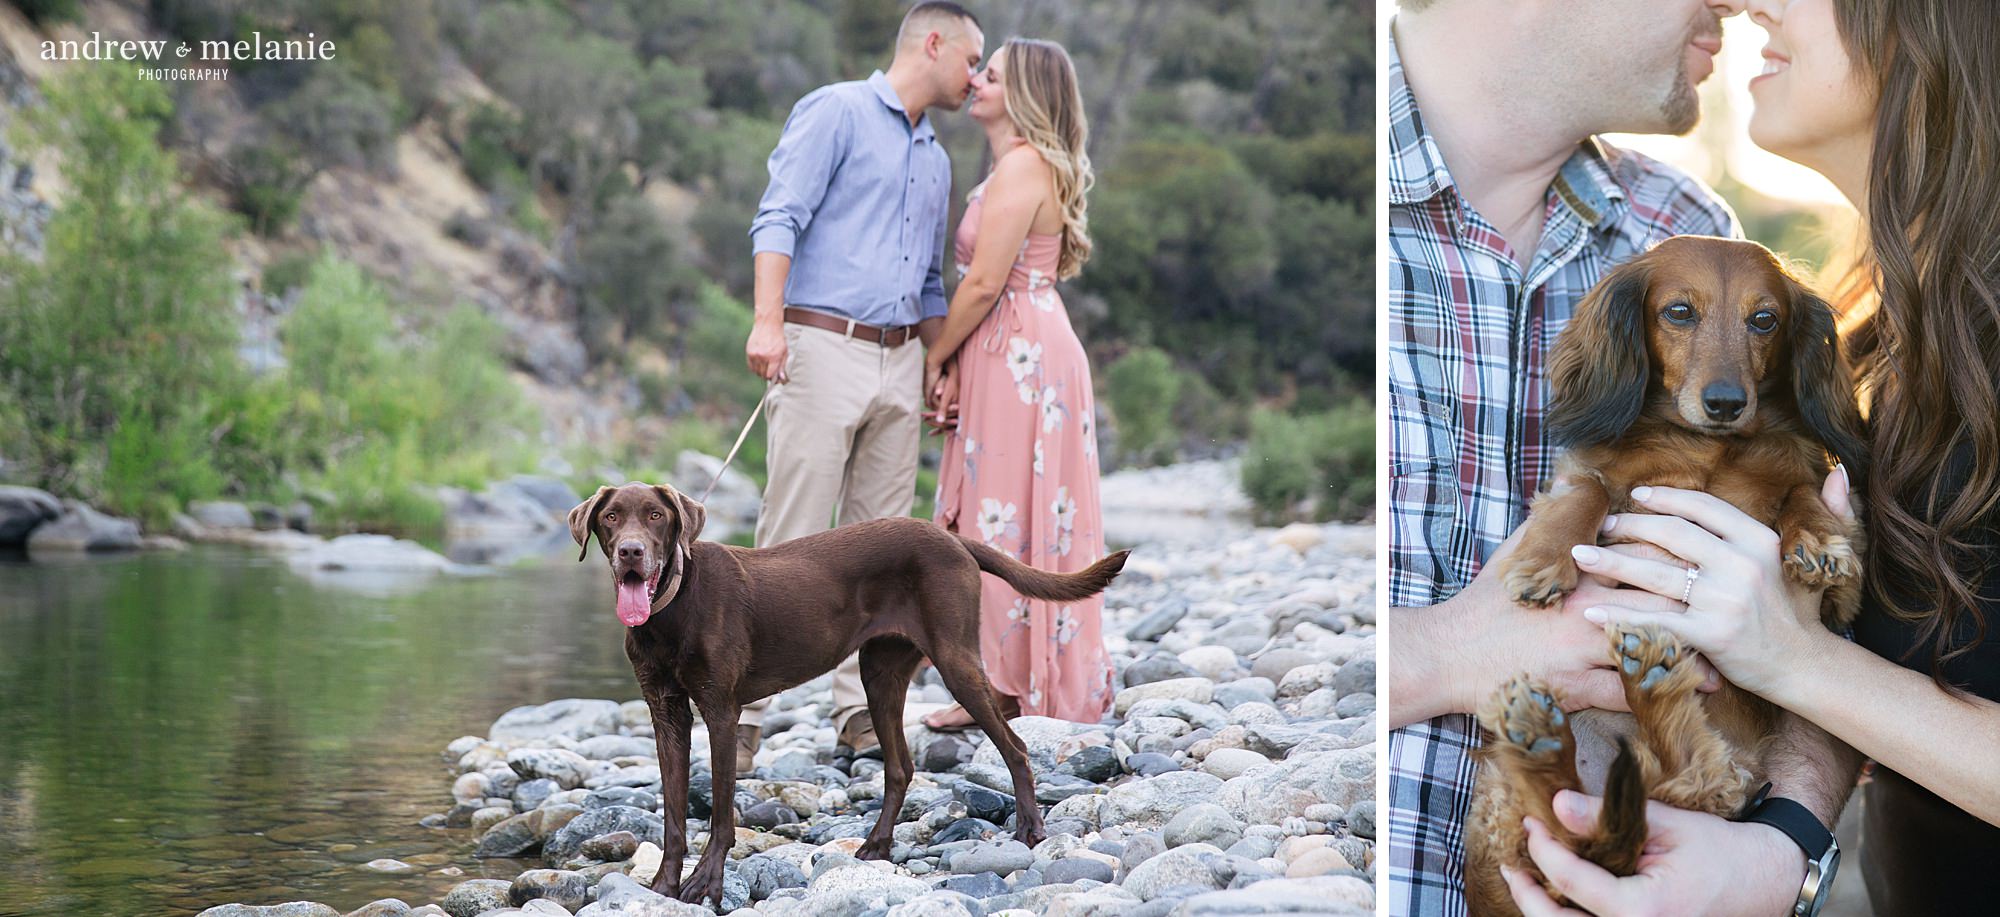 Andrew and Melanie Photography engagement session highlights with dogs